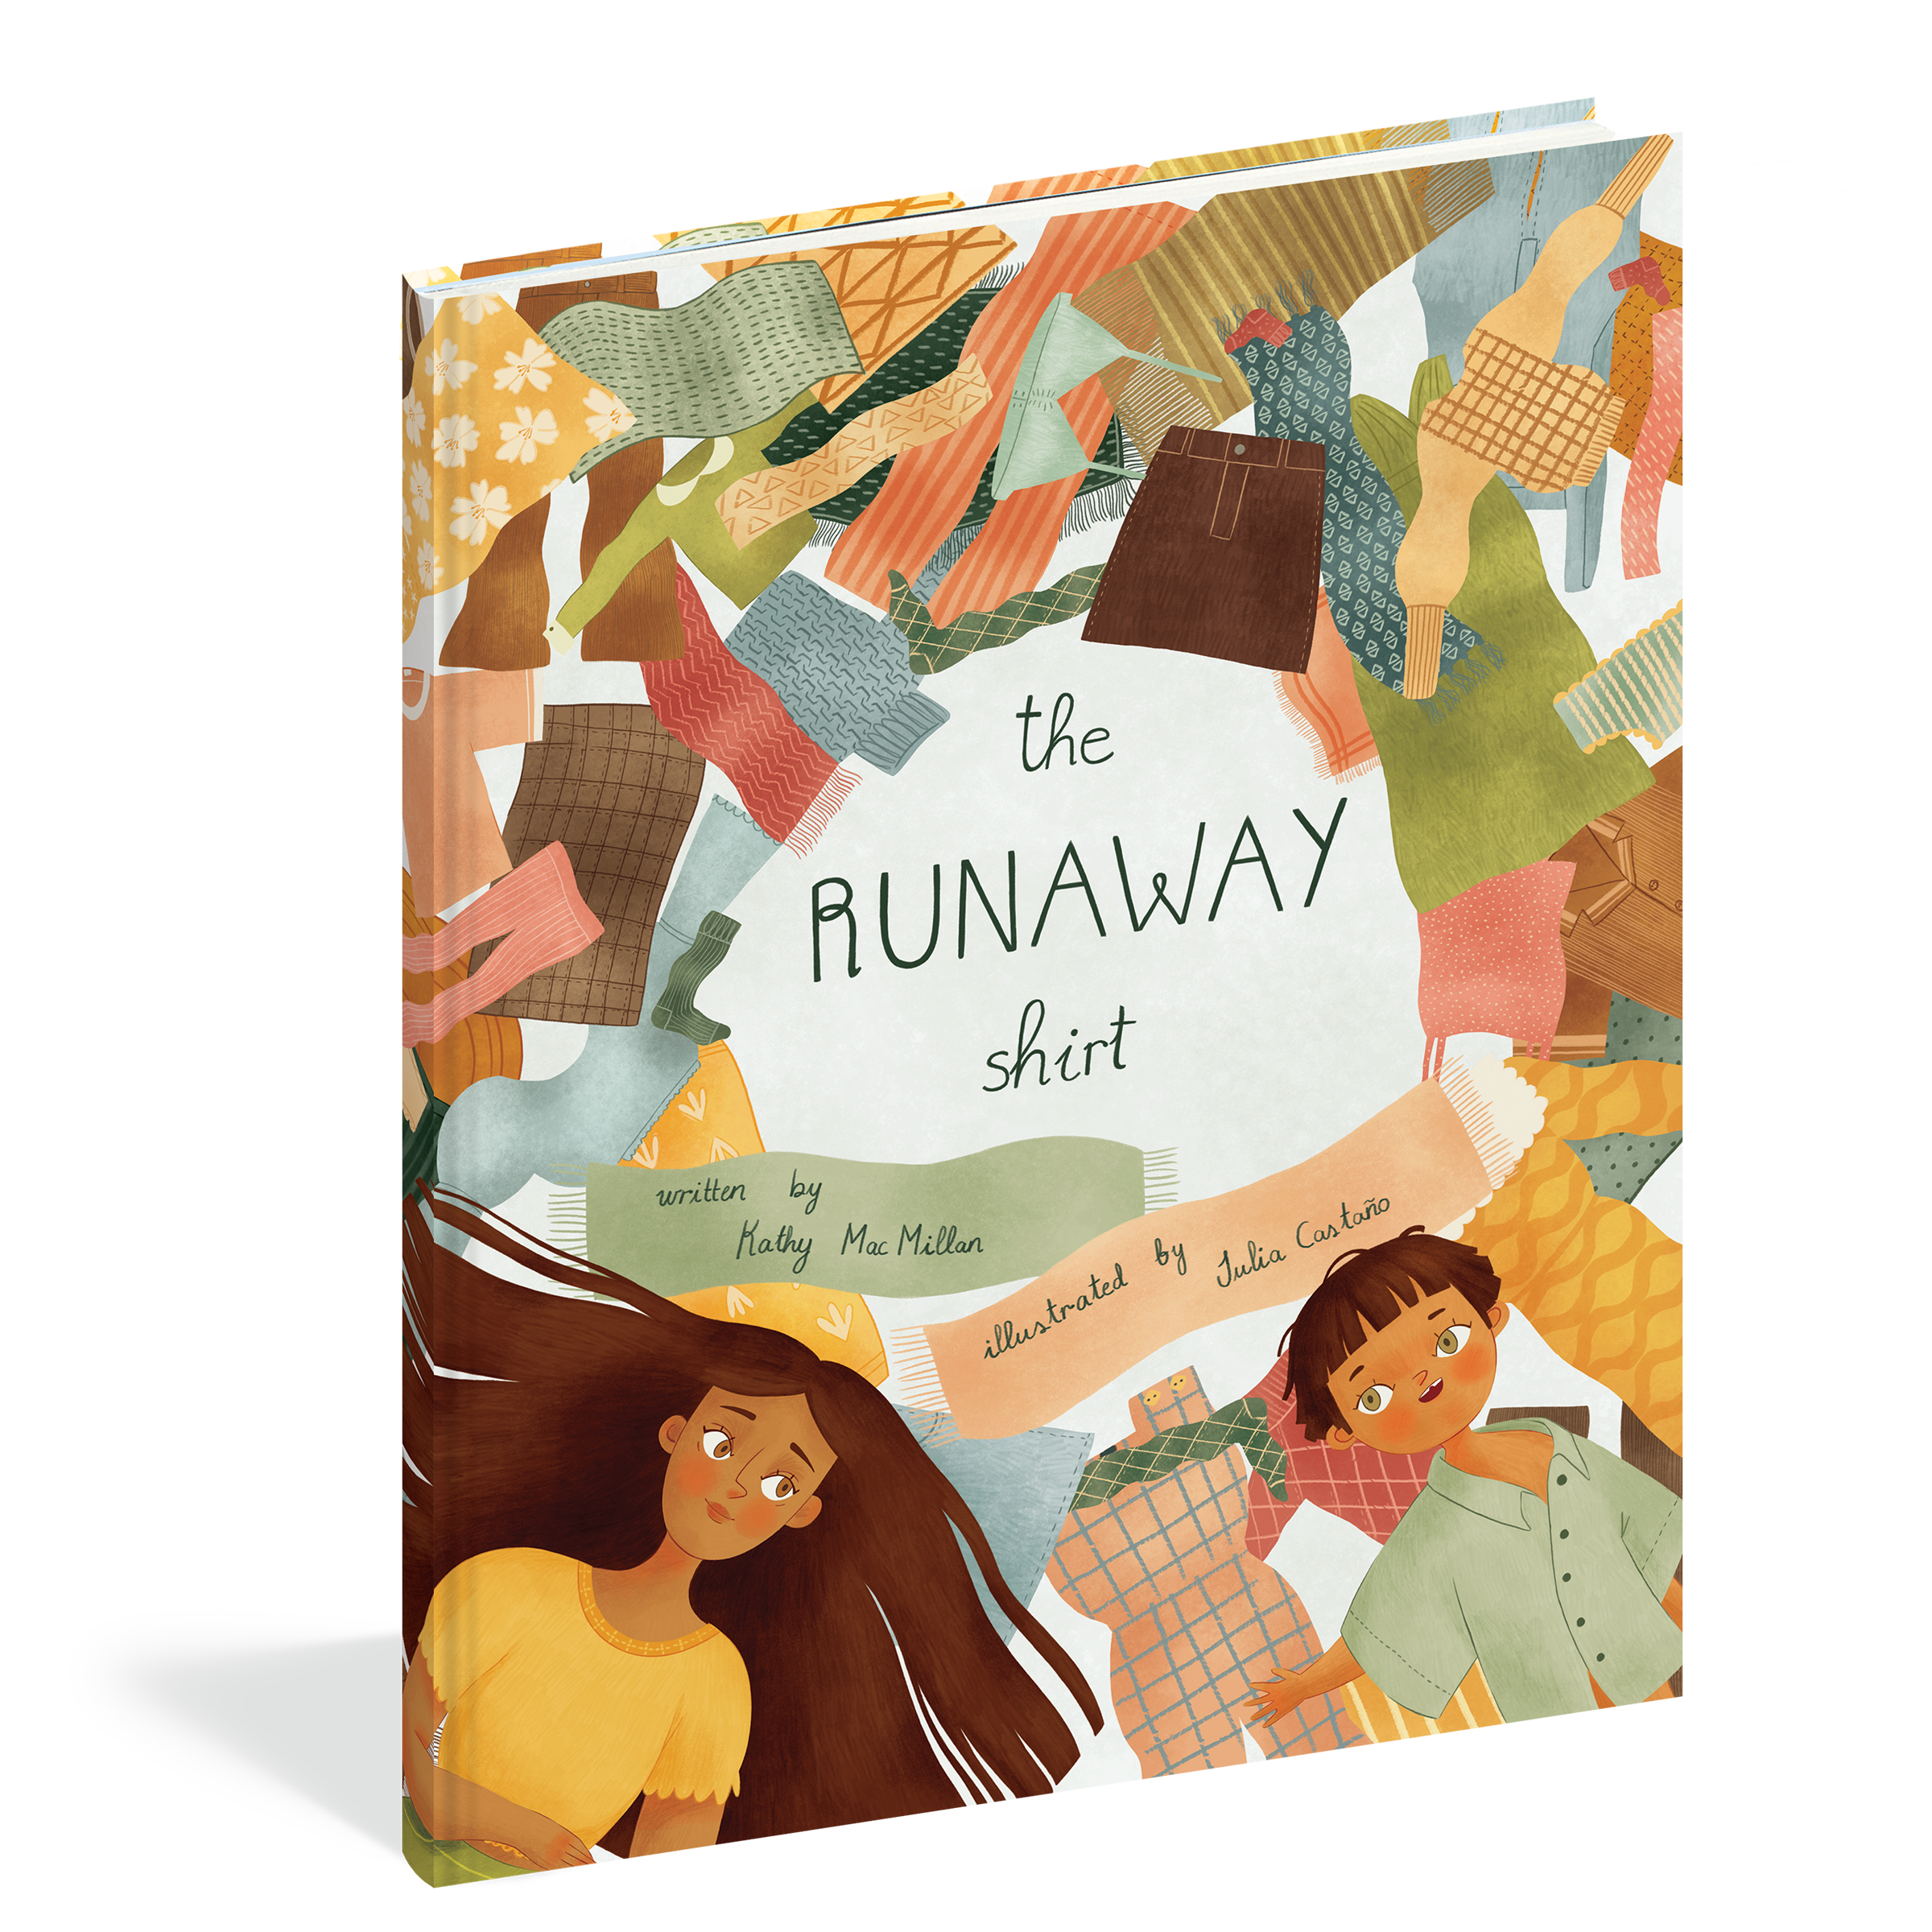 The cover of the picture book The Runaway Shirt.